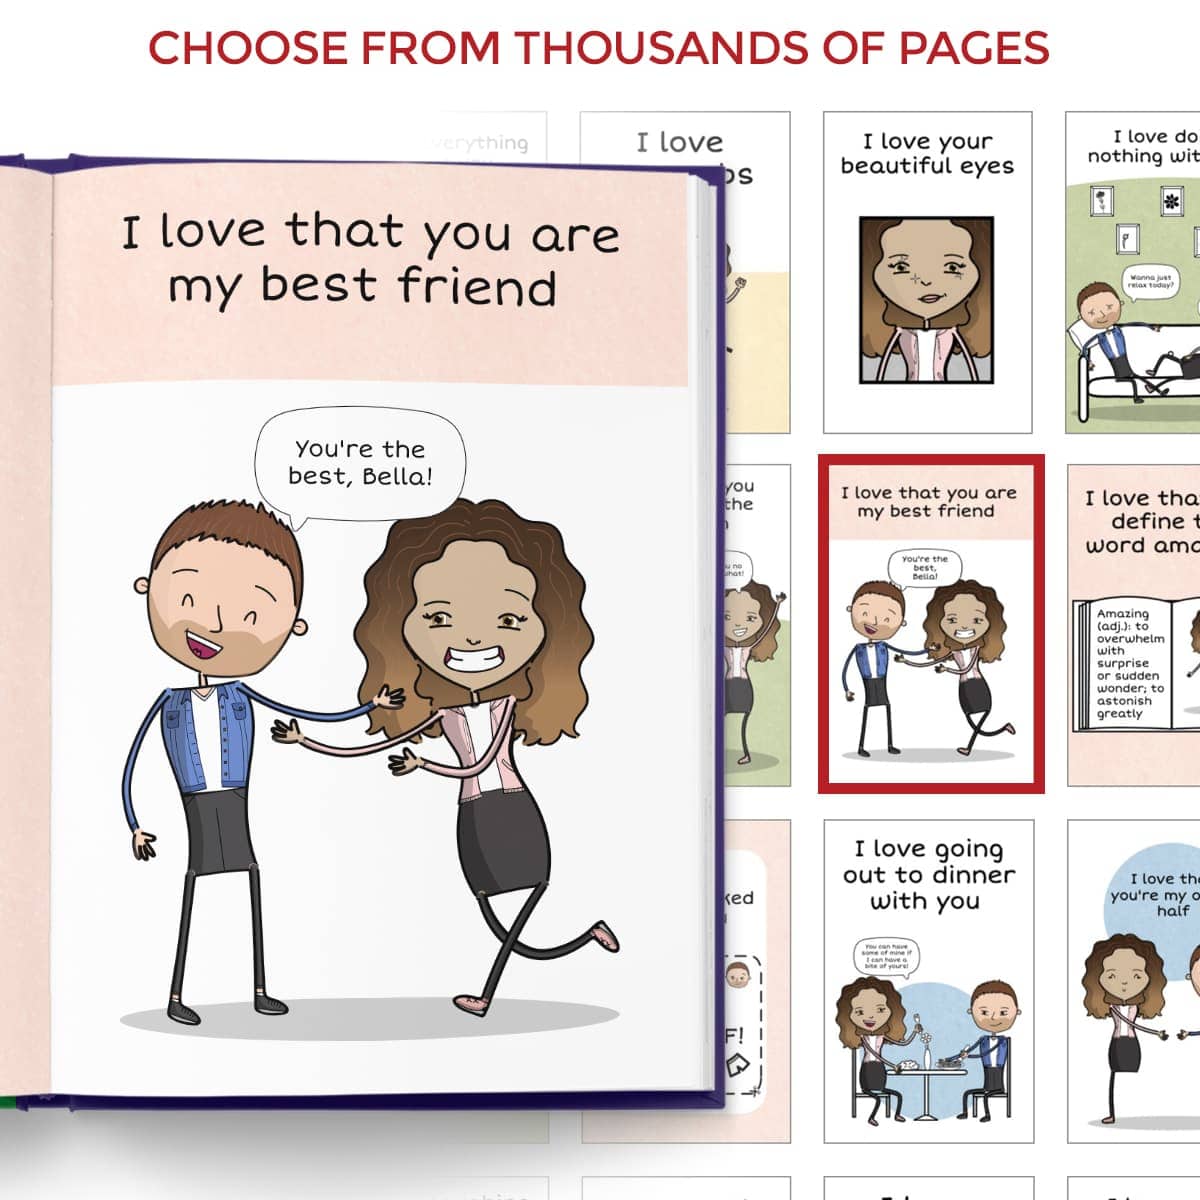 First Anniversary Gifts by LoveBook | The Personalized Gift Book That Says Why You Love Someone | LoveBook Online - 2